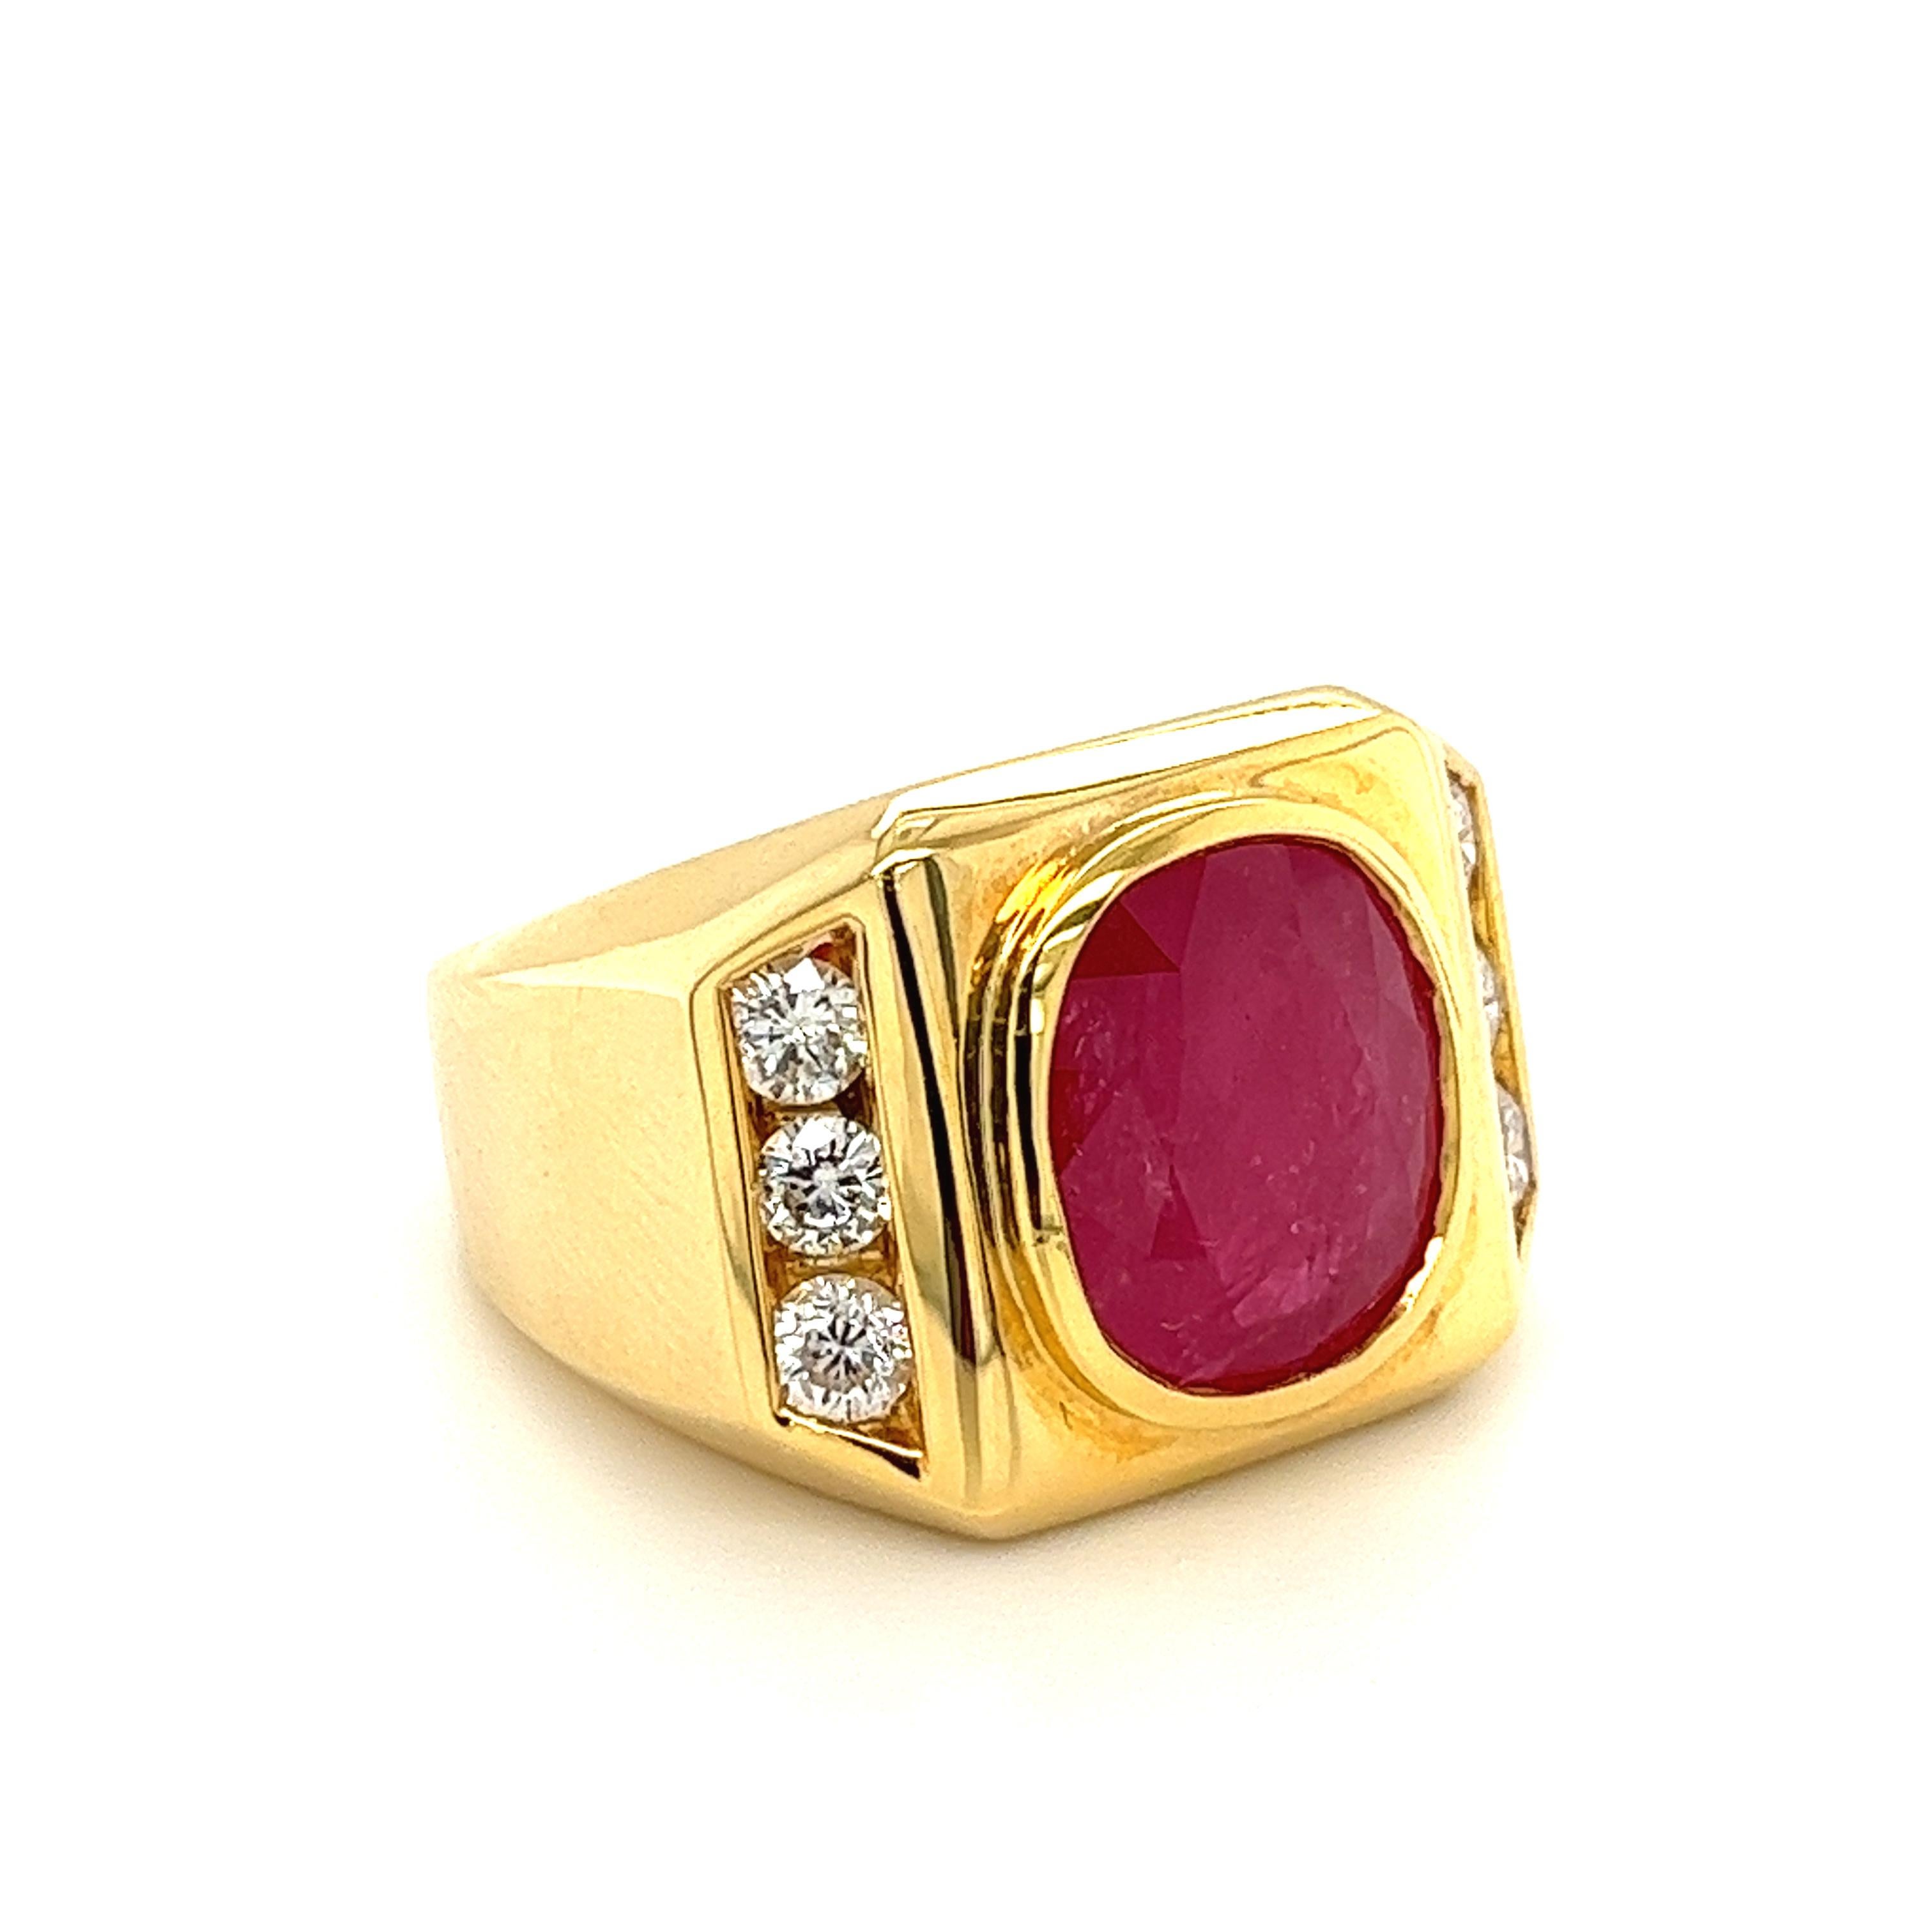 Vintage 14k solid gold Ruby gypsy style men's ring. GRS Certified Ruby with H(b) grade treatment. All high-quality color and clarity diamonds mounted in thick 14k gold setting. Bezel set Ruby and Diamonds in a strong 14k gold ring make for a ring